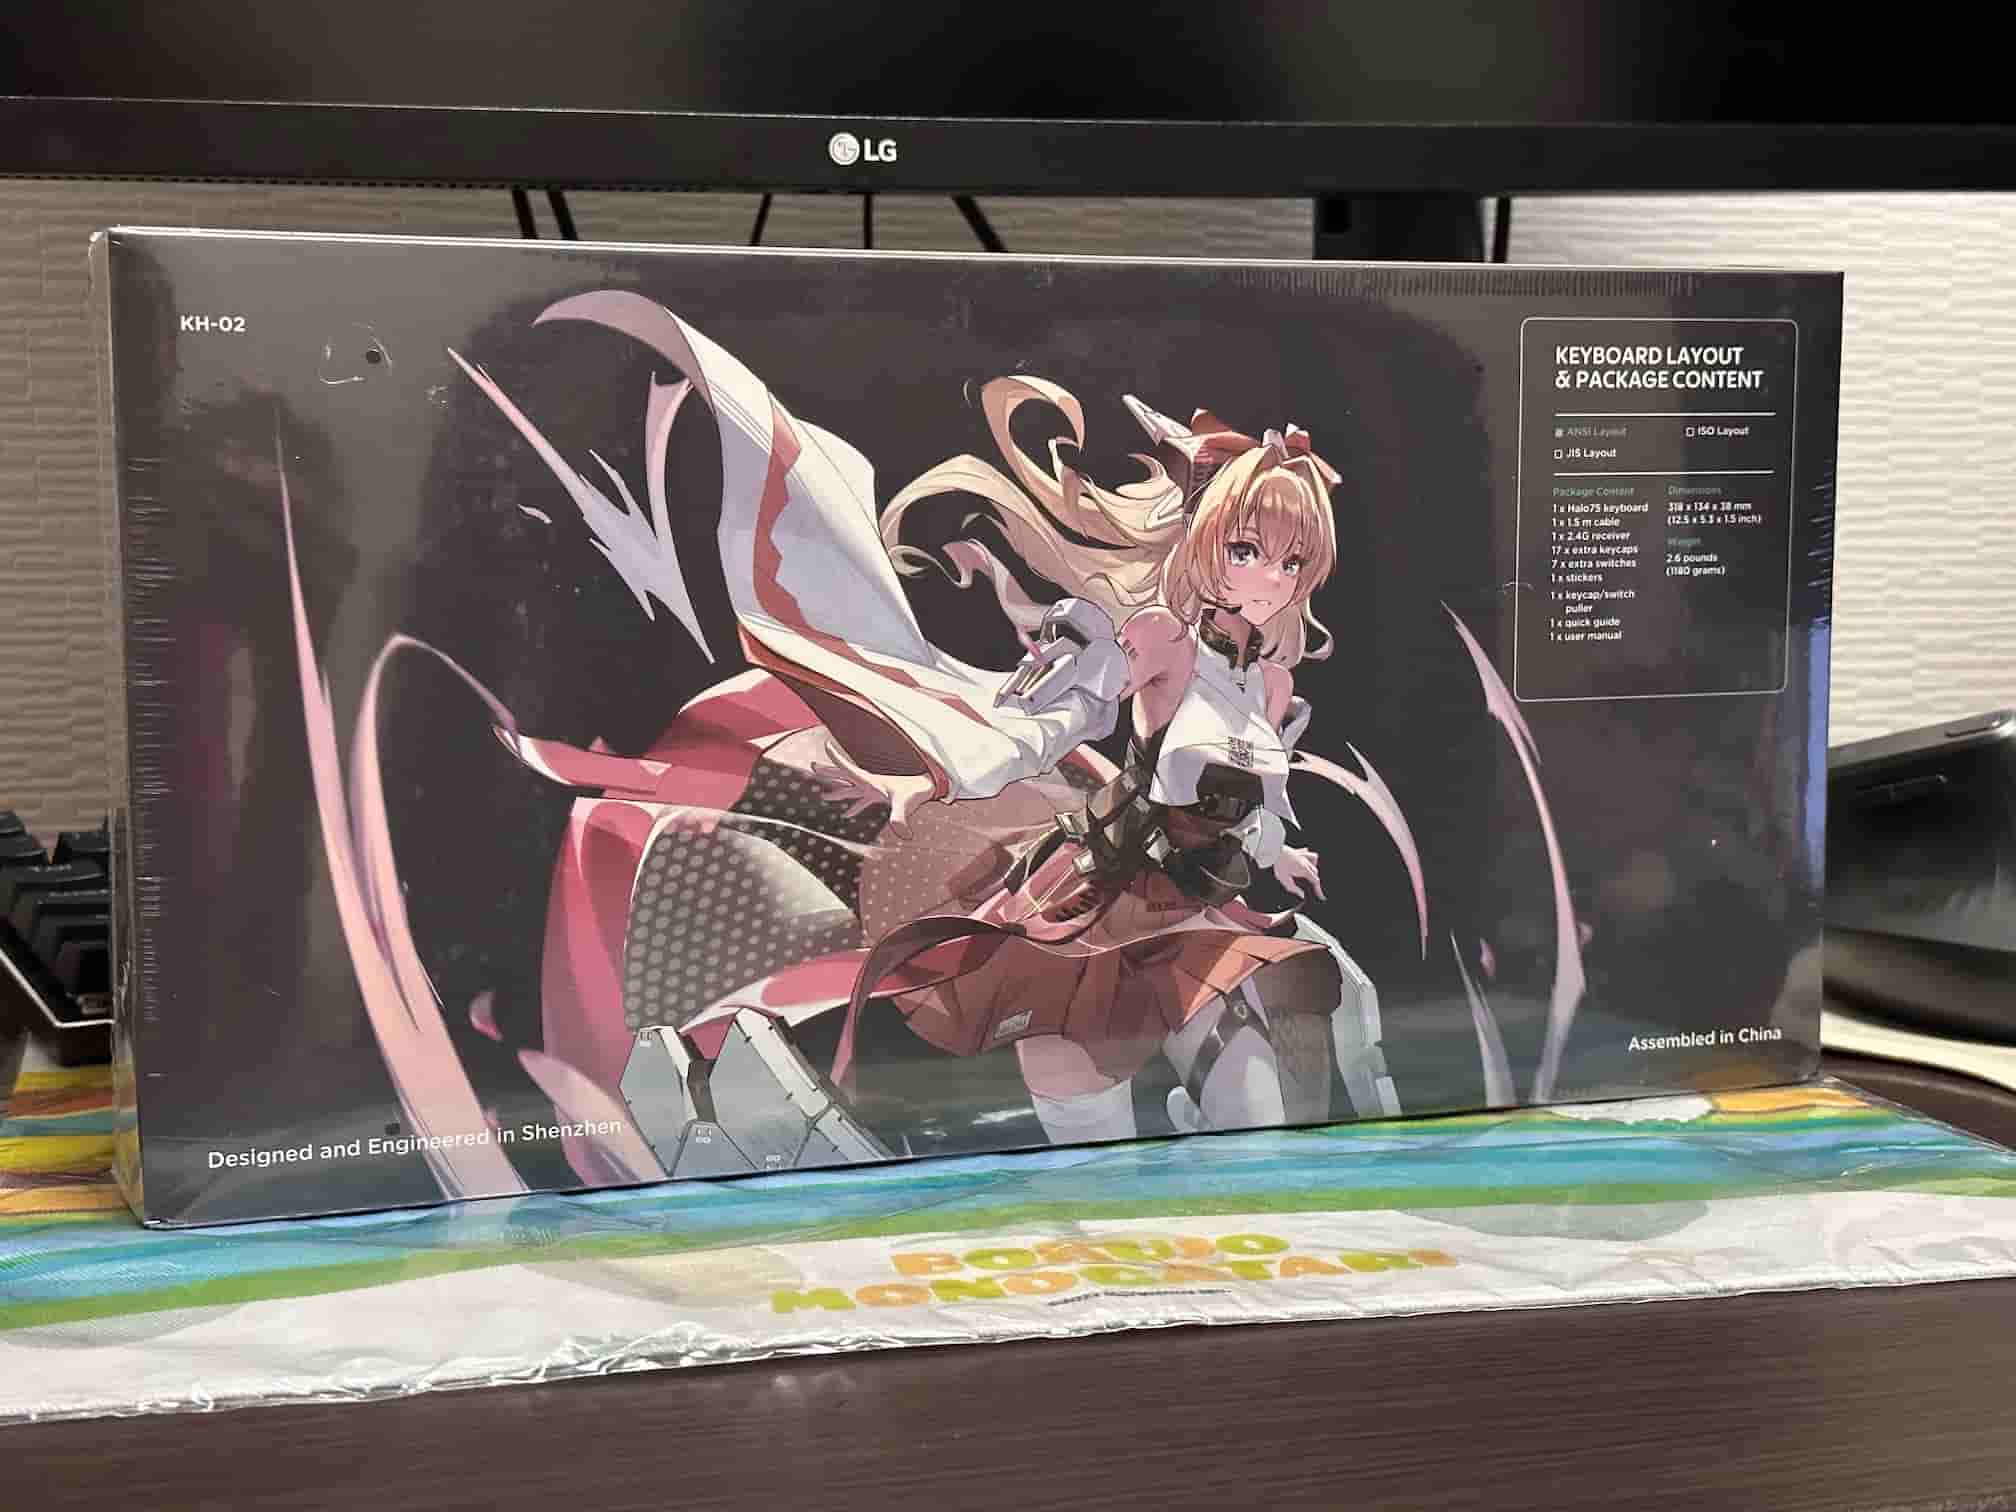 Boxed NuPhy Halo75 mechanical keyboard featuring a prominent anime girl illustration on the back. The box also includes details on the keyboard layout and package contents, noting the design and engineering in Shenzhen and assembly in China